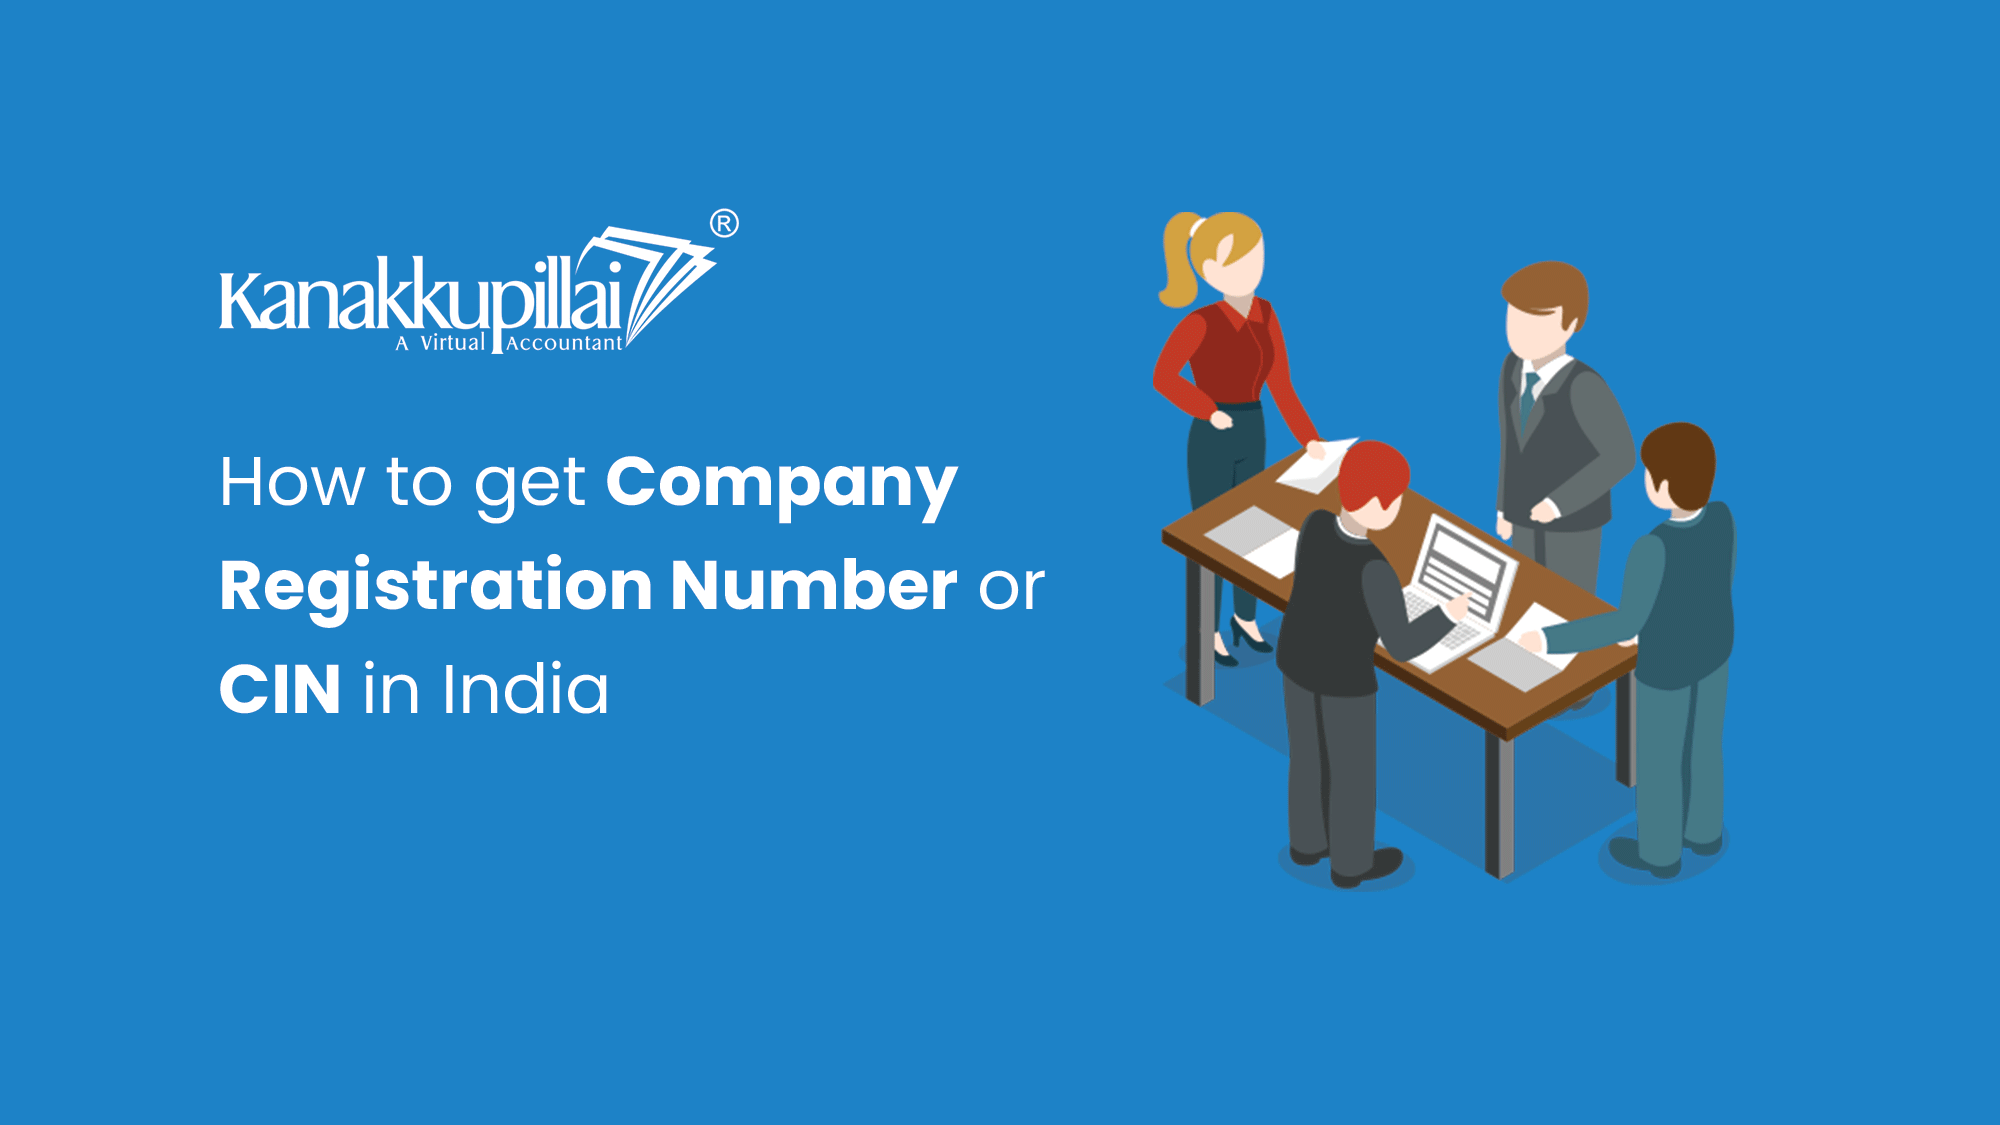 How to get Company Registration Number or CIN in India? – Steps to Check CIN Online